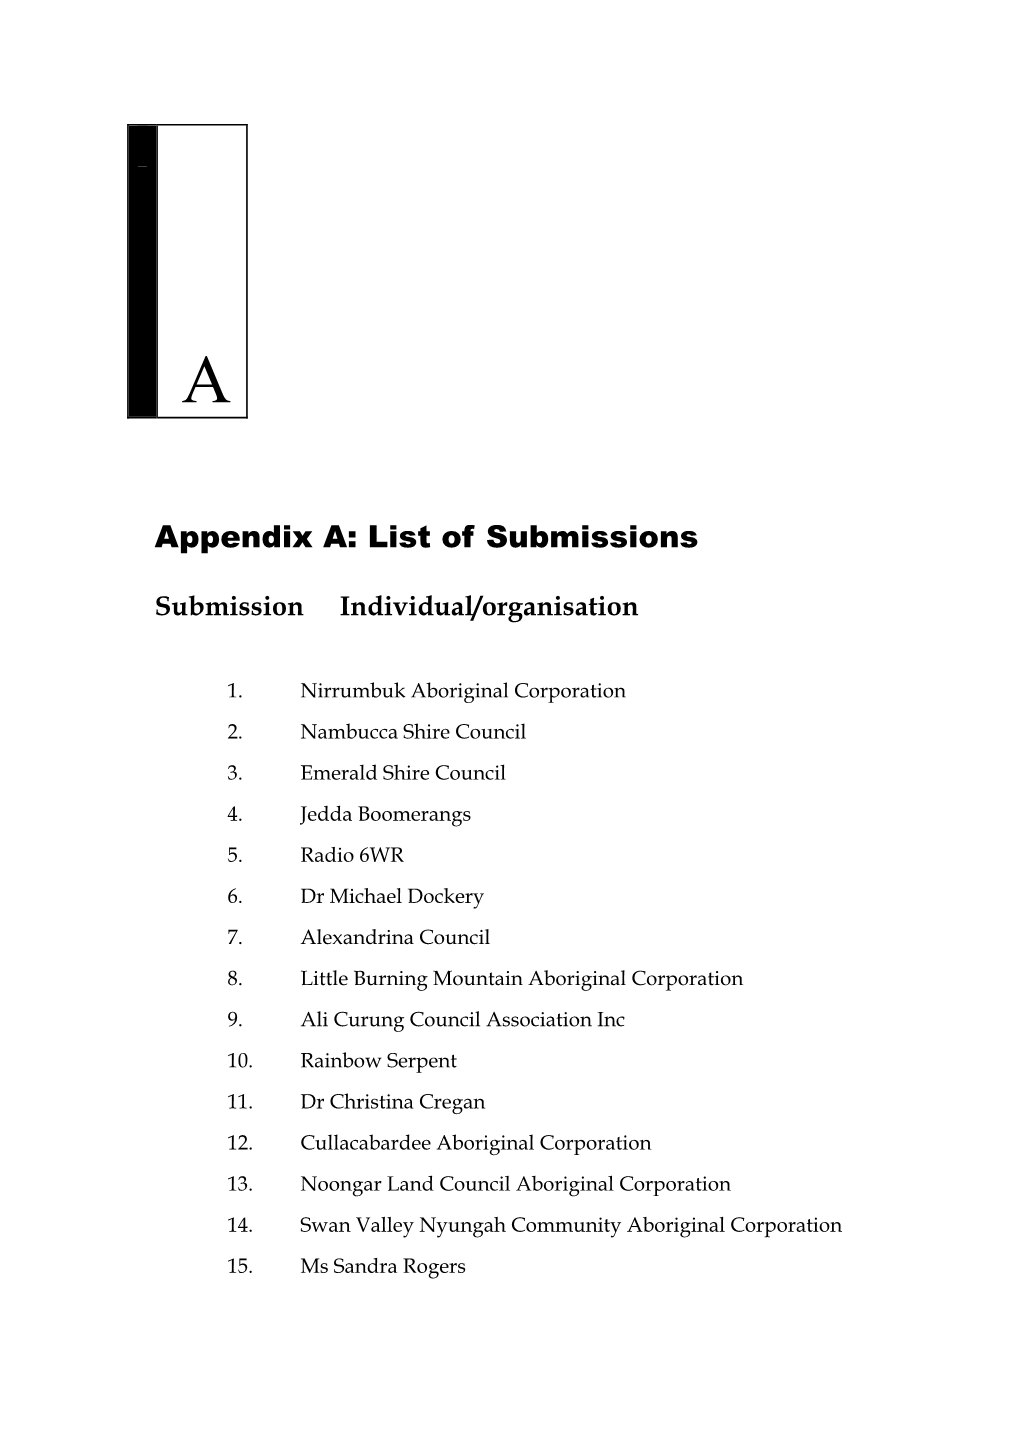 Appendix A: List of Submissions